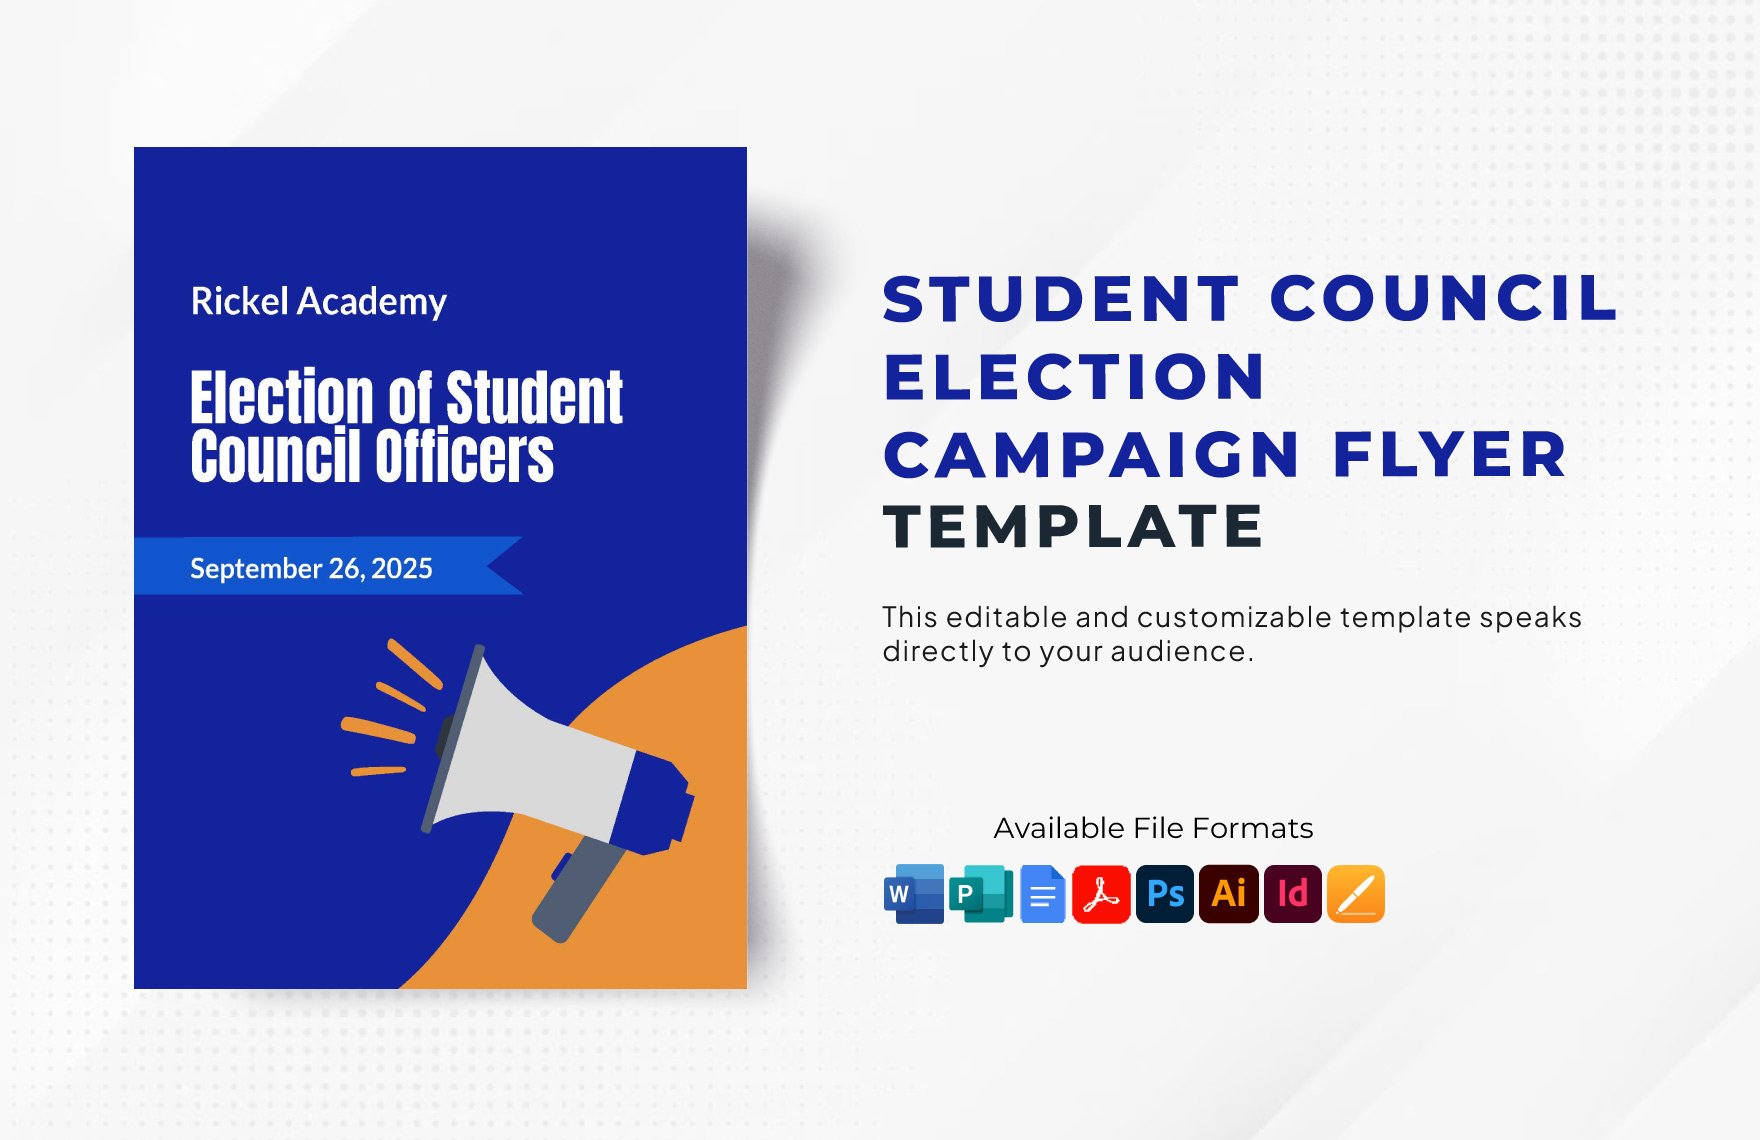 Student Council Election Campaign Flyer Template